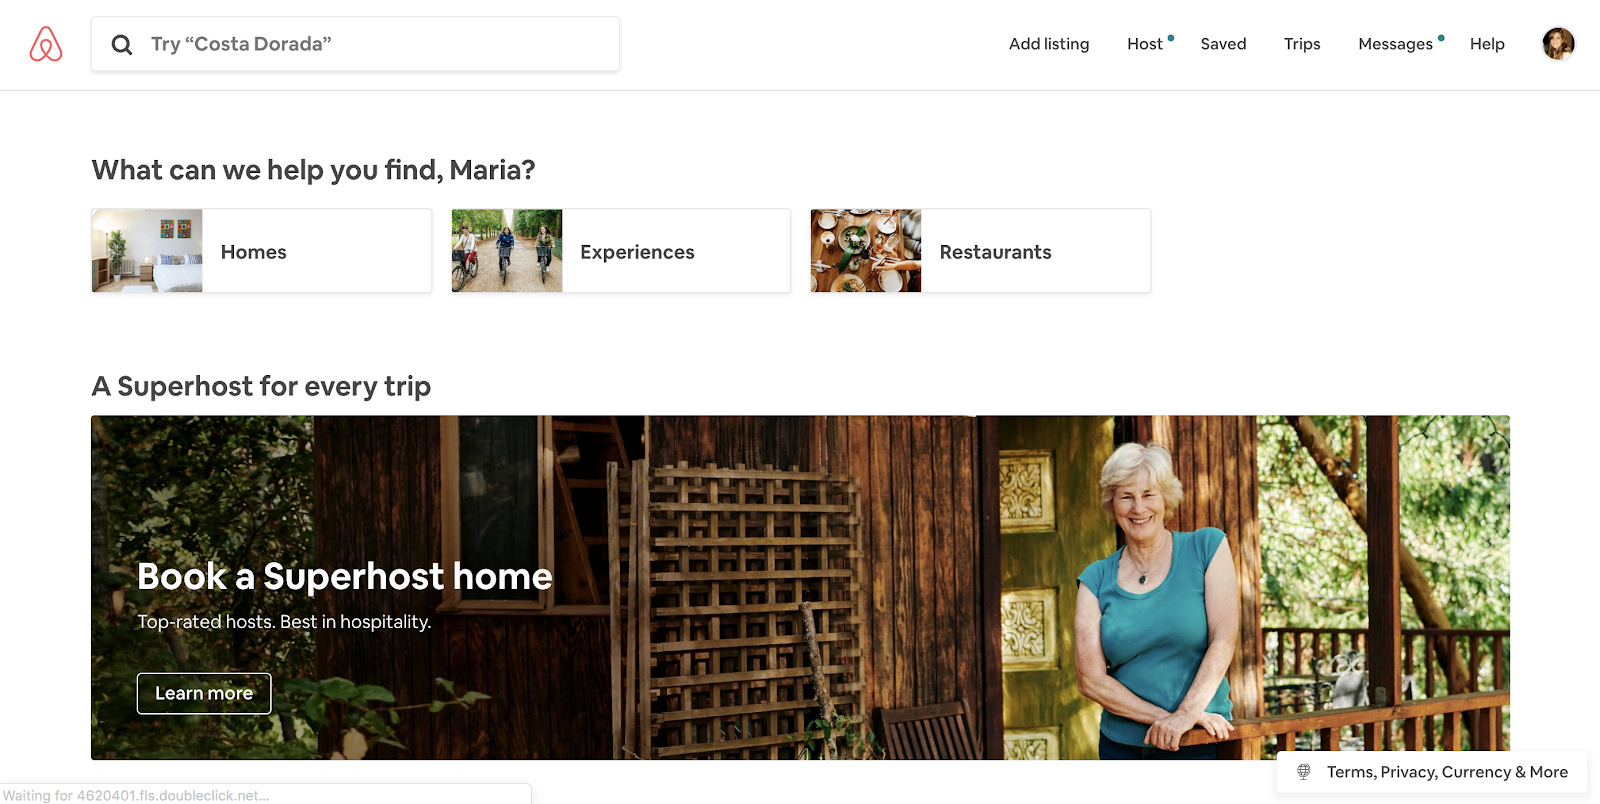 An example of microcopy in the search field, as used by Airbnb